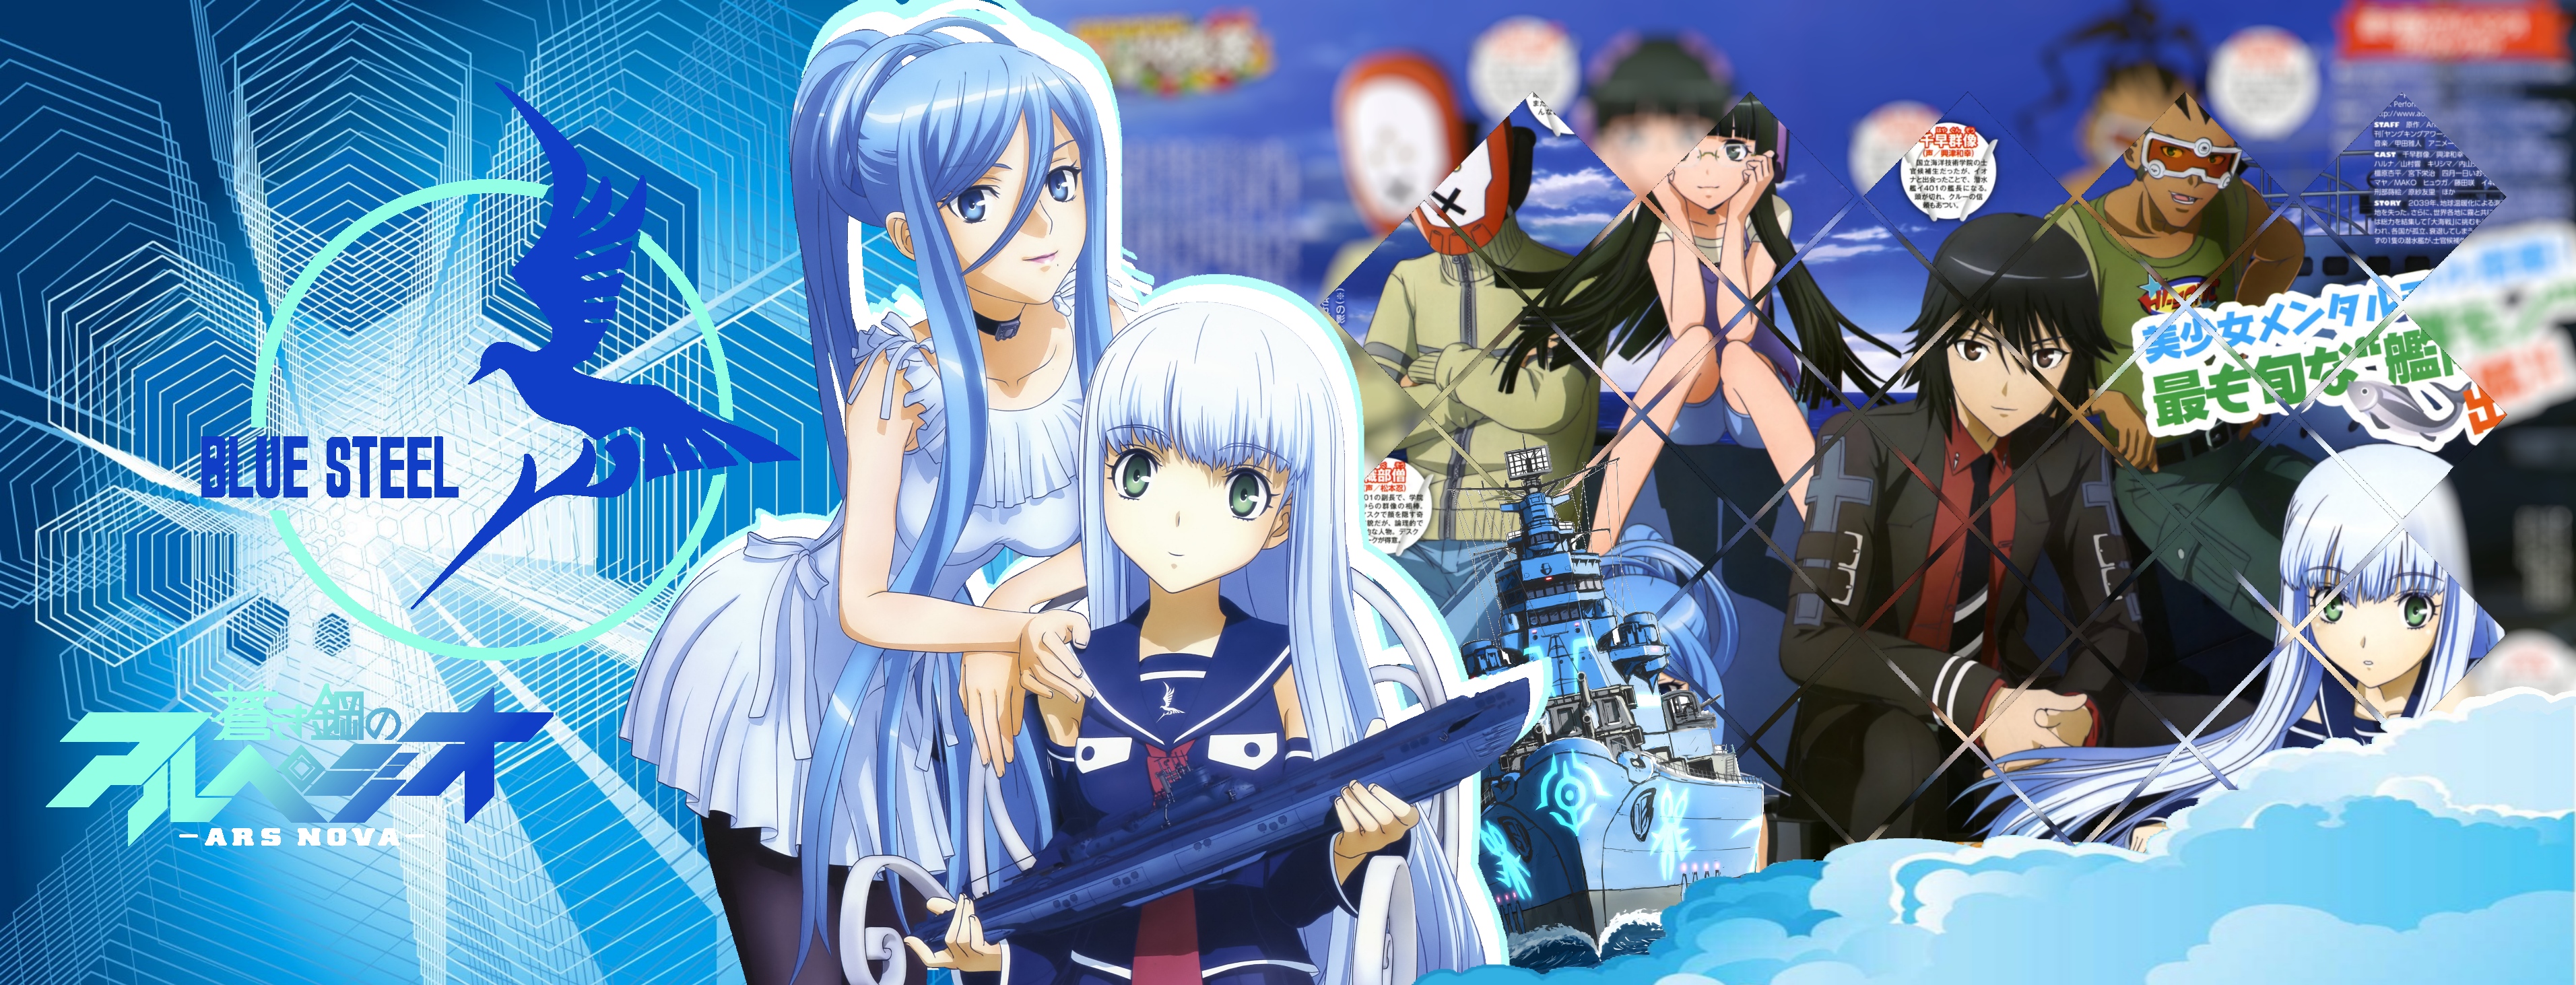 Arpeggio Of Blue Steel Wallpapers